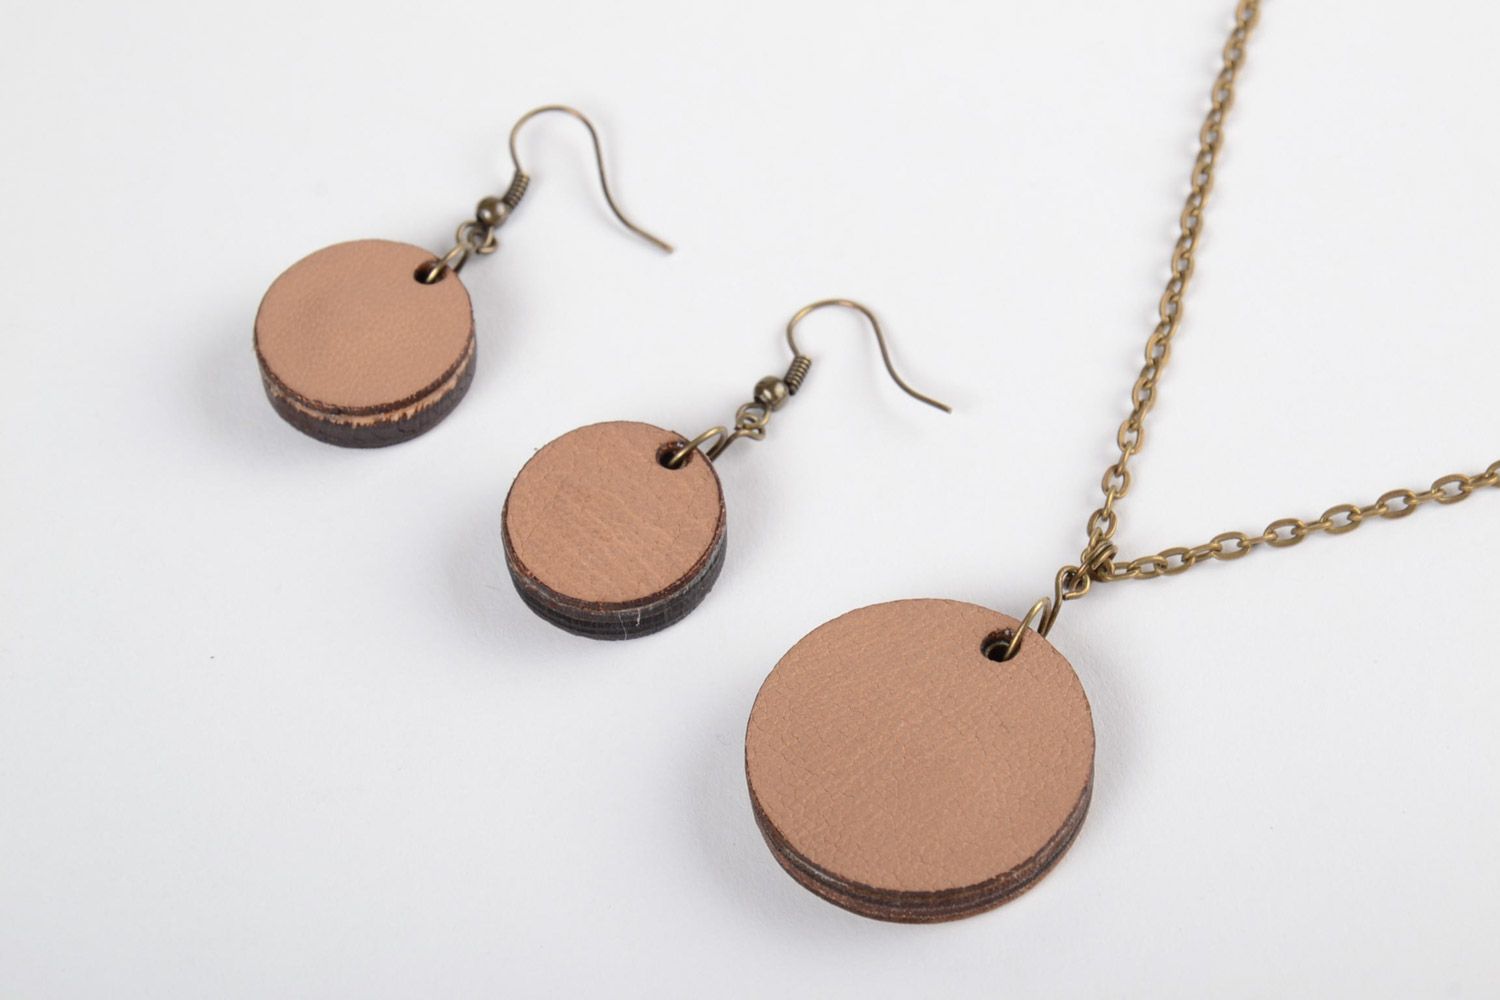 Handmade wooden jewelry set 2 pcs earrings and pendant with embroidery photo 3